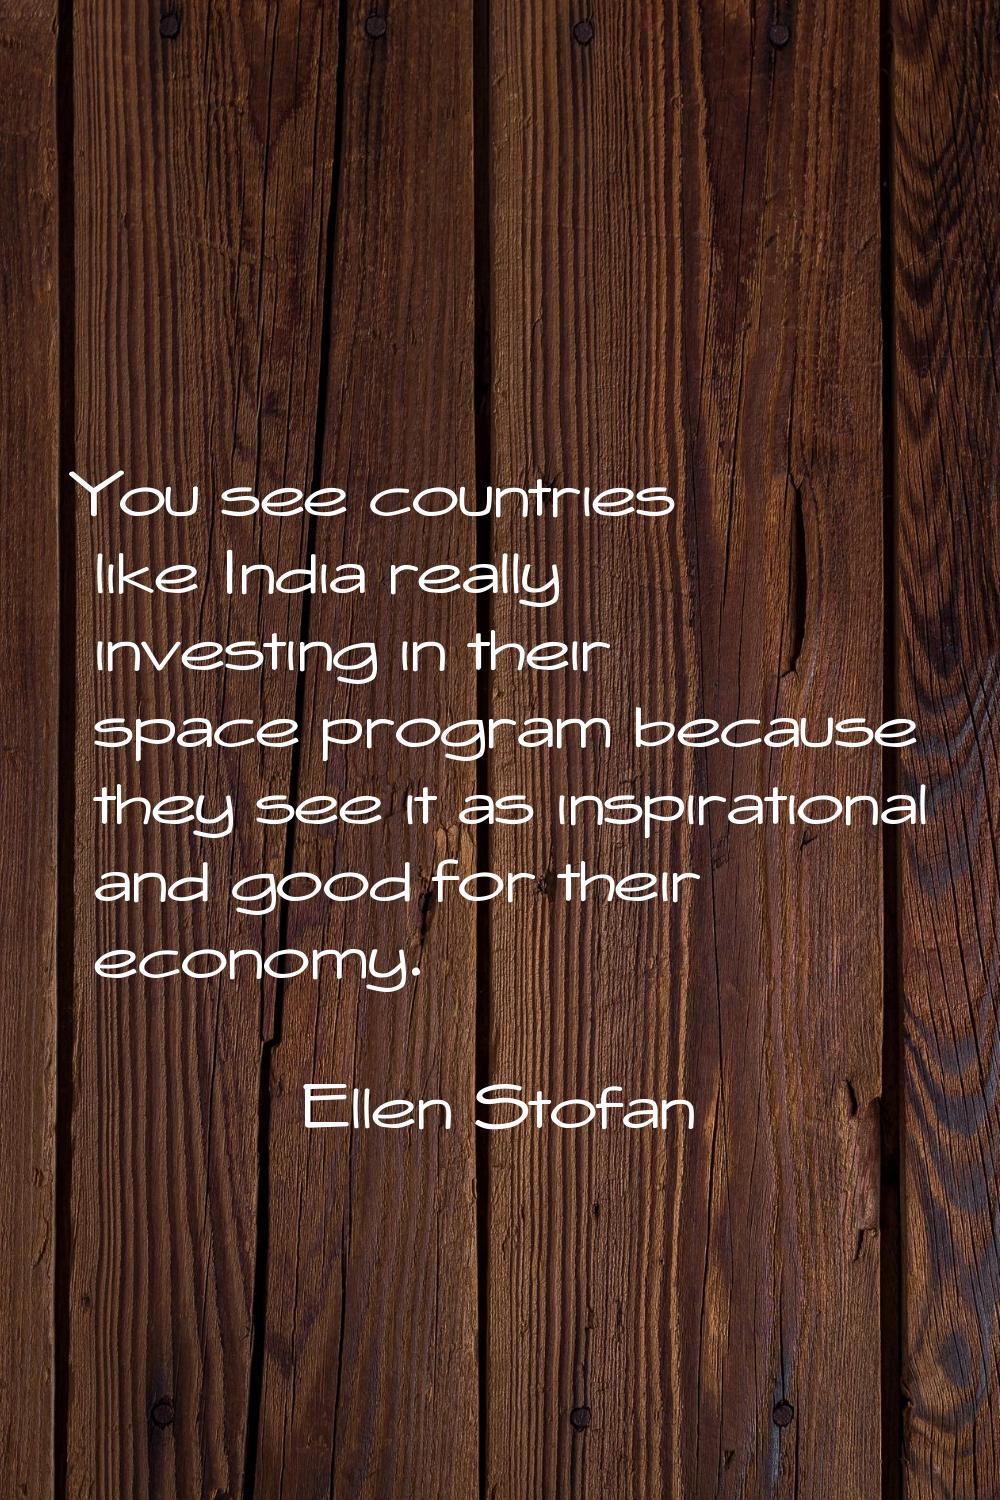 You see countries like India really investing in their space program because they see it as inspira